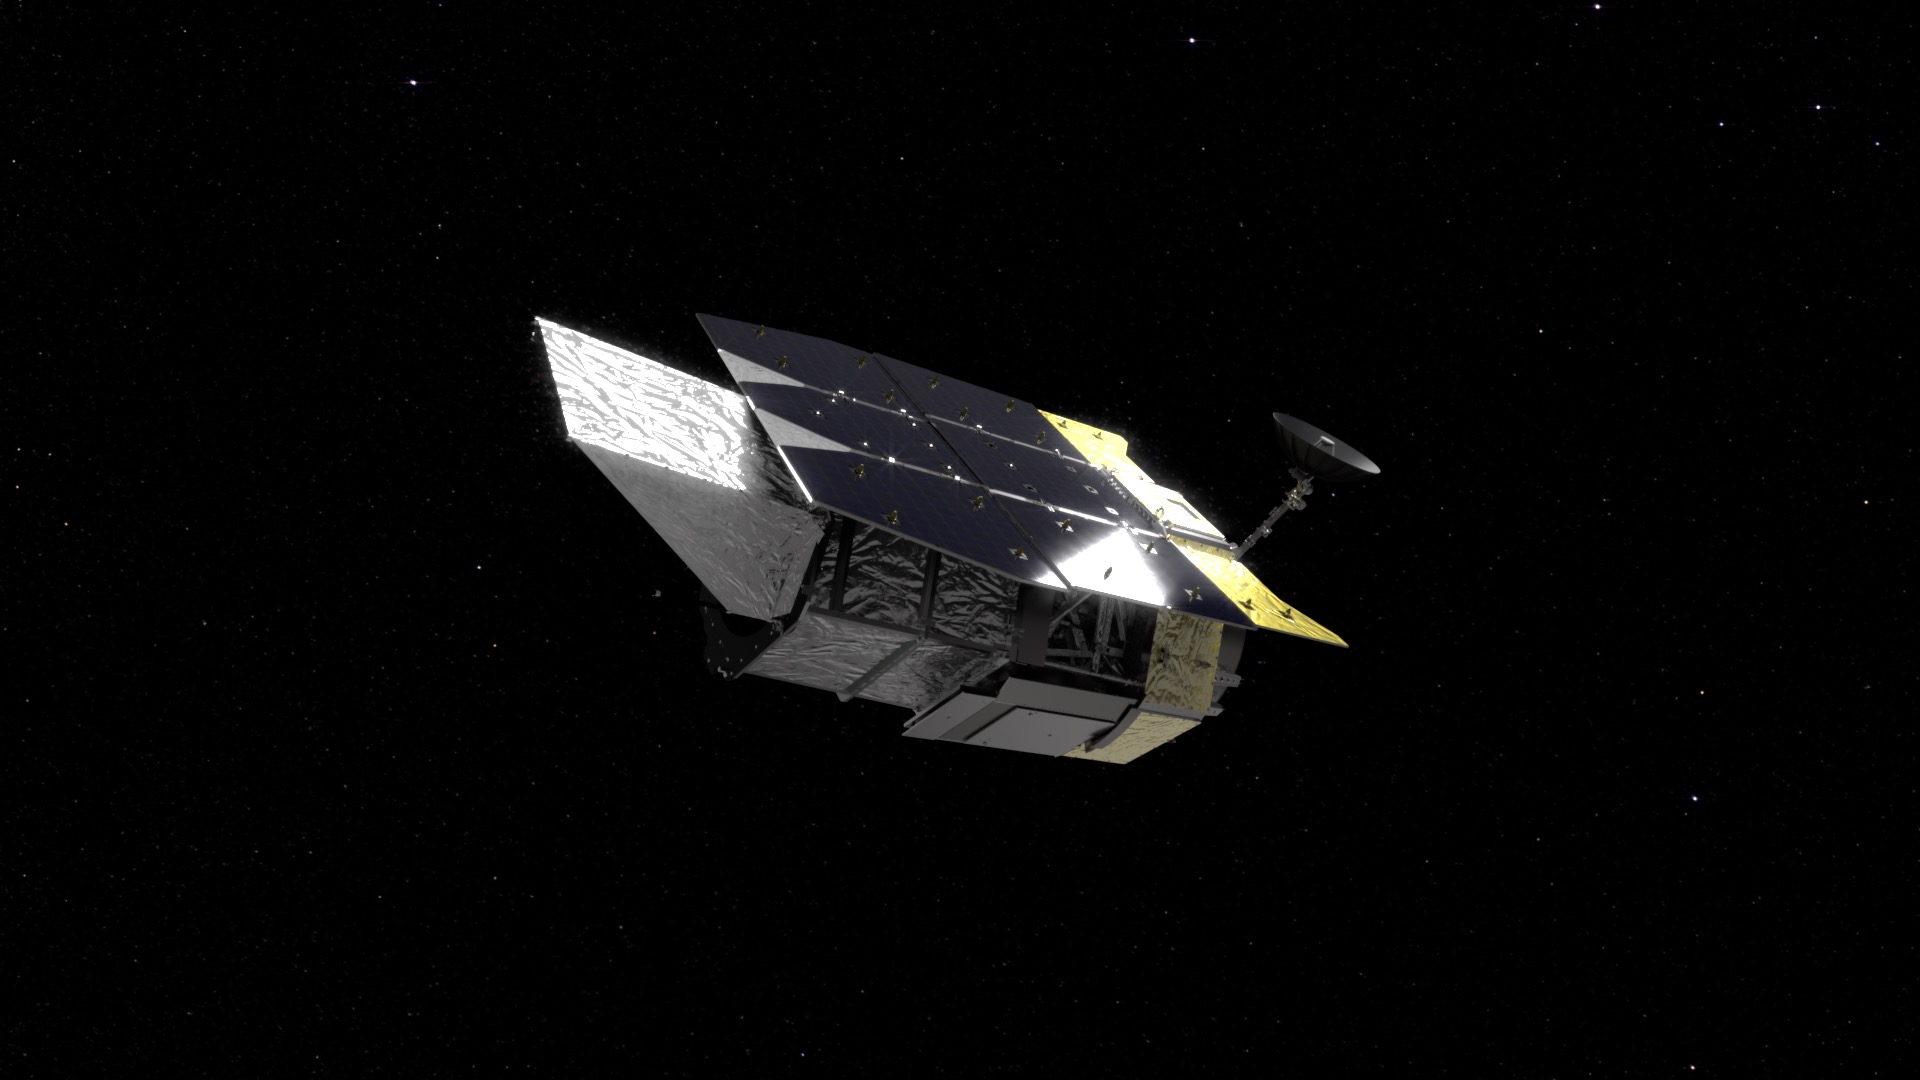 "Beauty pass" animation of the Roman Space Telescope spacecraft